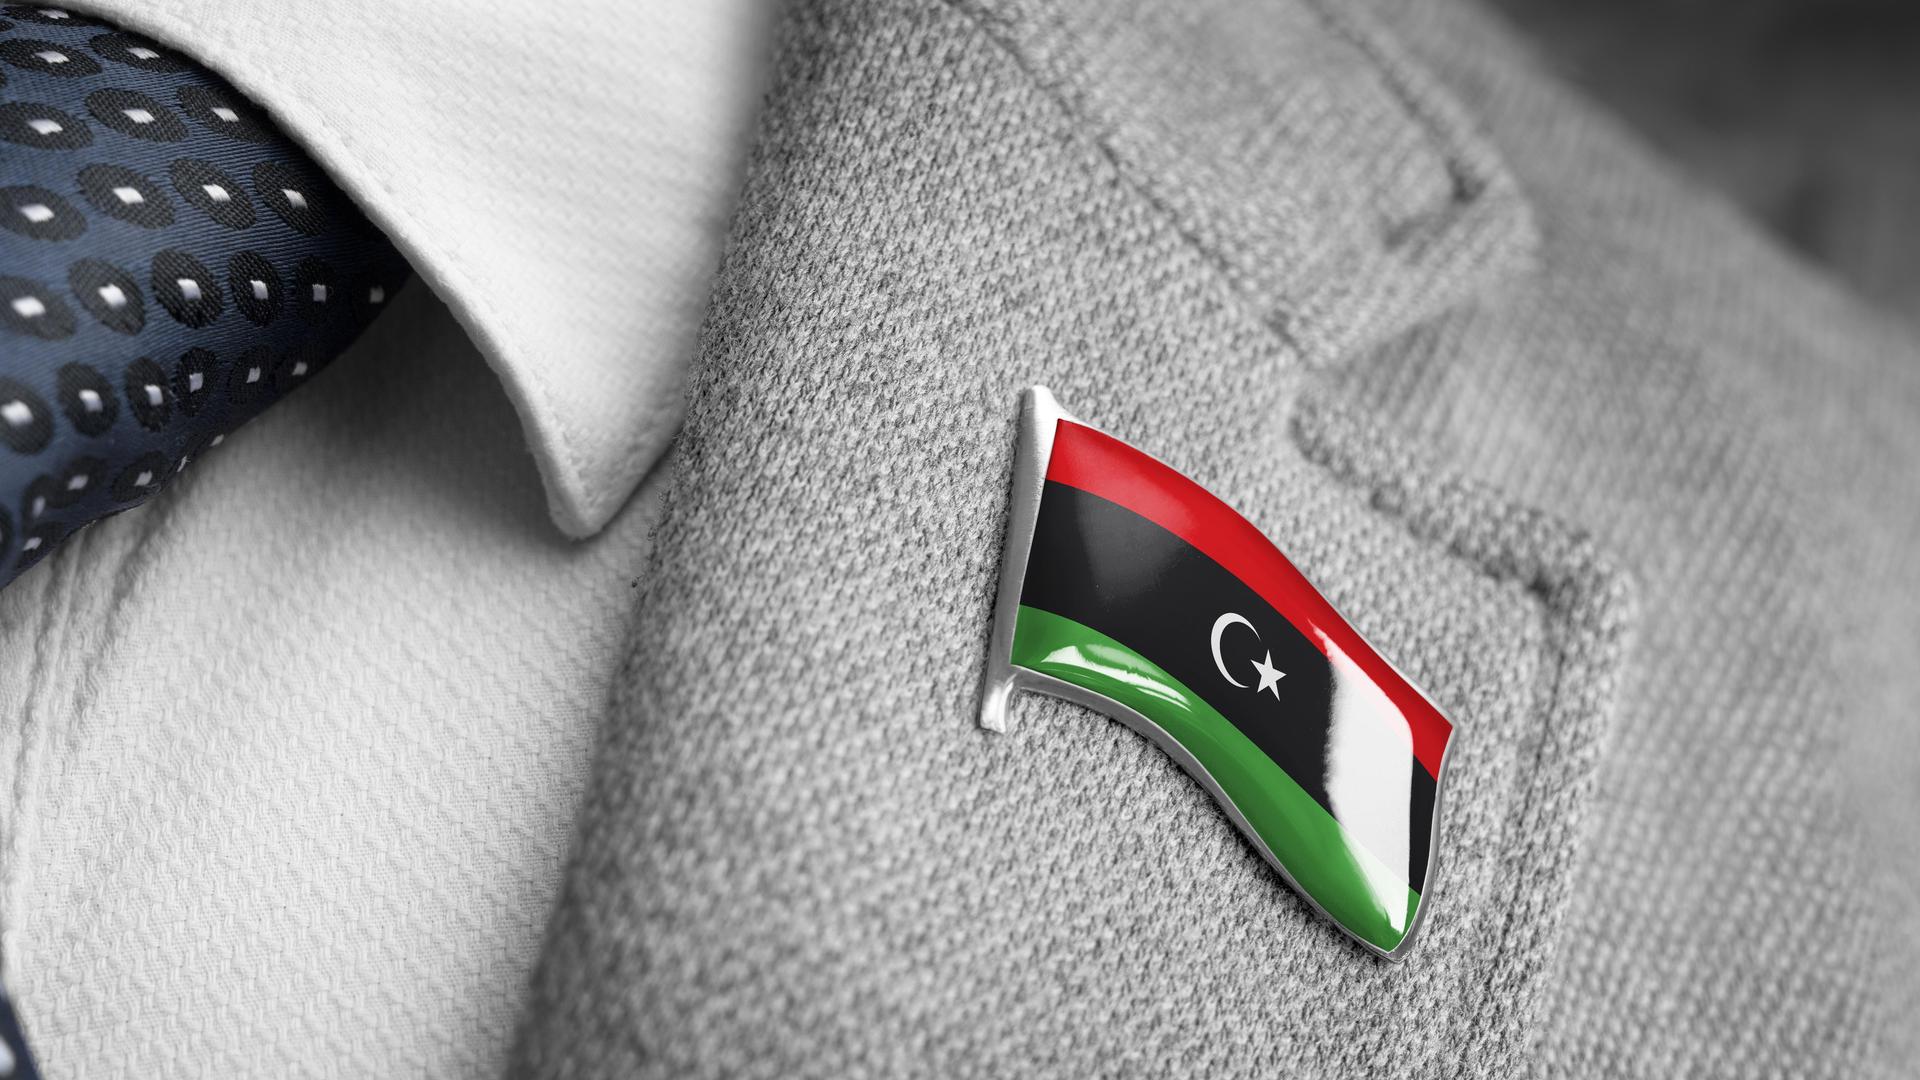 Metal badge with the flag of Libya on a suit lapel